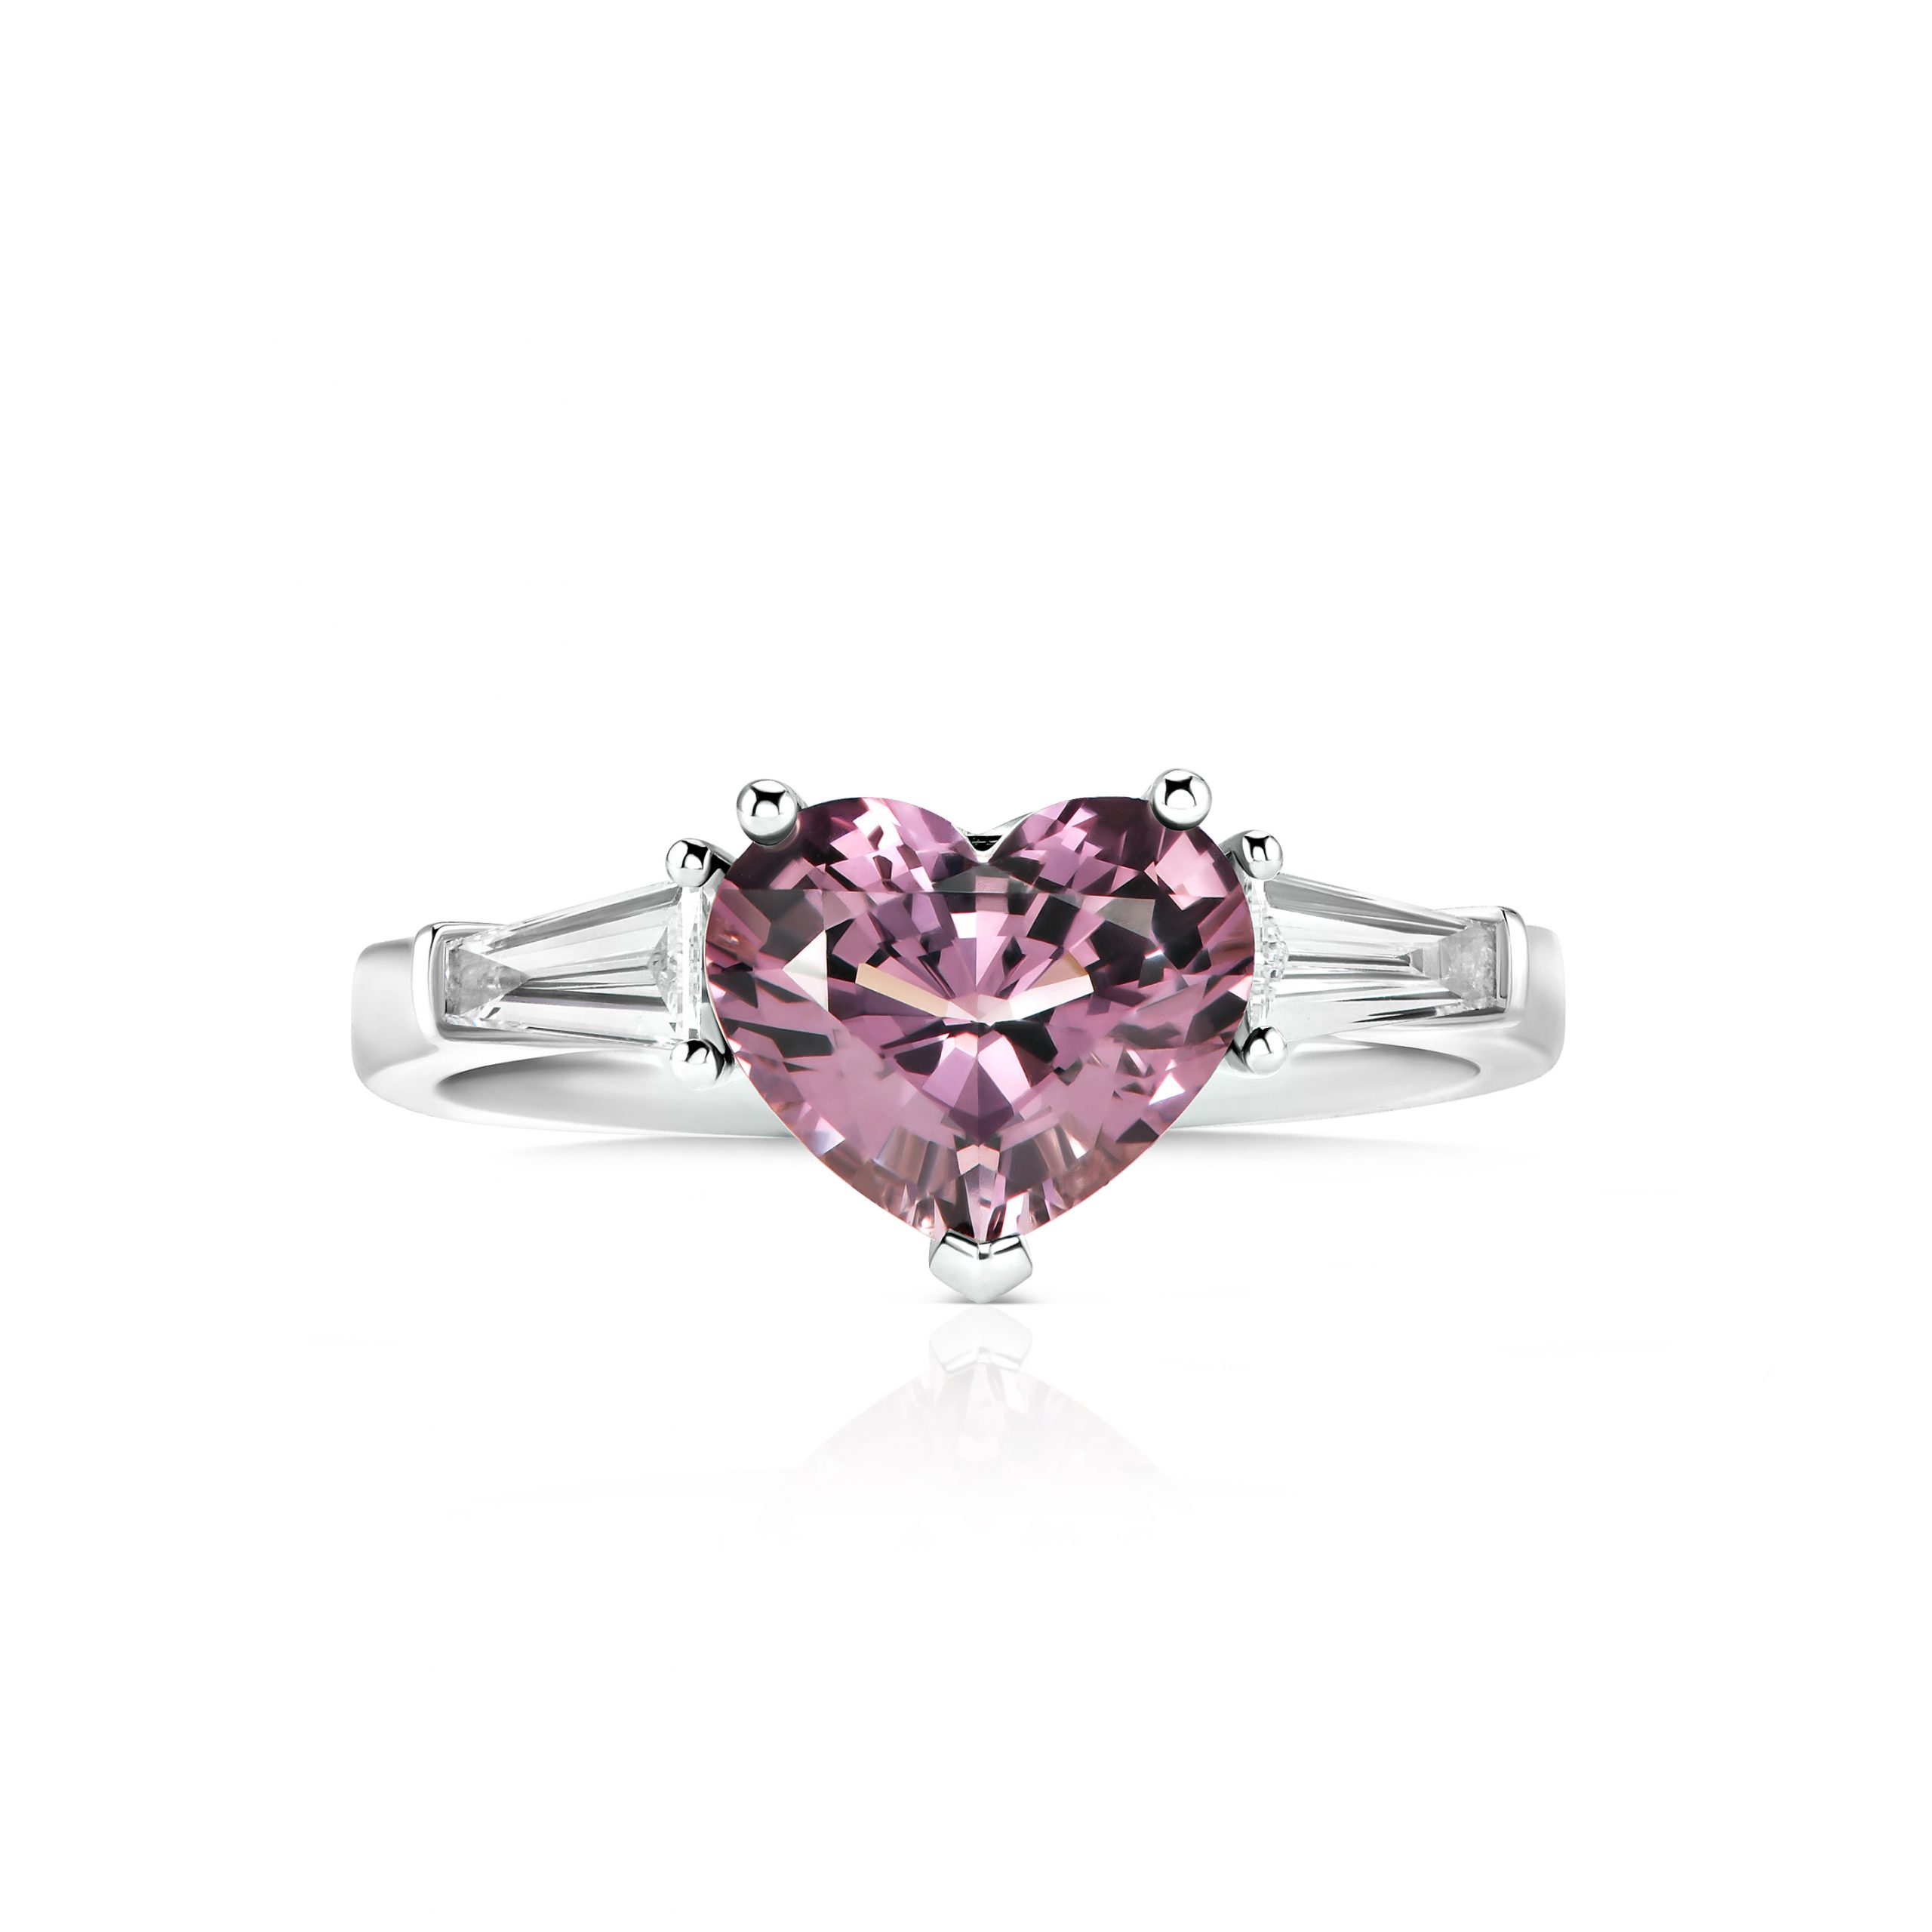 Spinel ring 1.92 ct #1